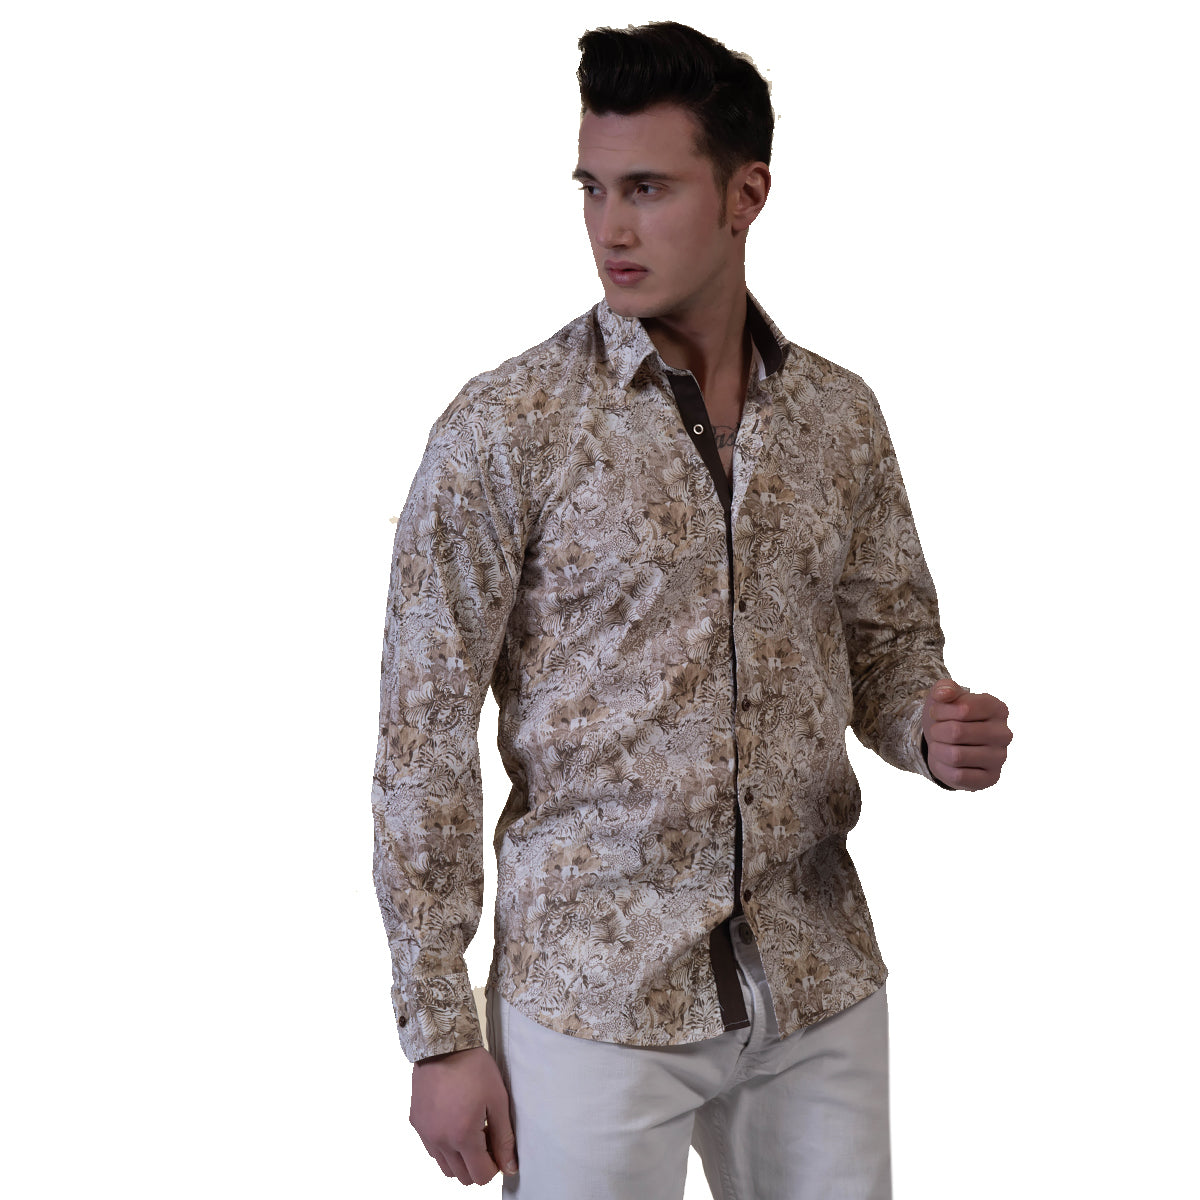 Beige Mens Slim Fit Designer Dress Shirt - tailored Cotton Shirts for Work and Casual Wear